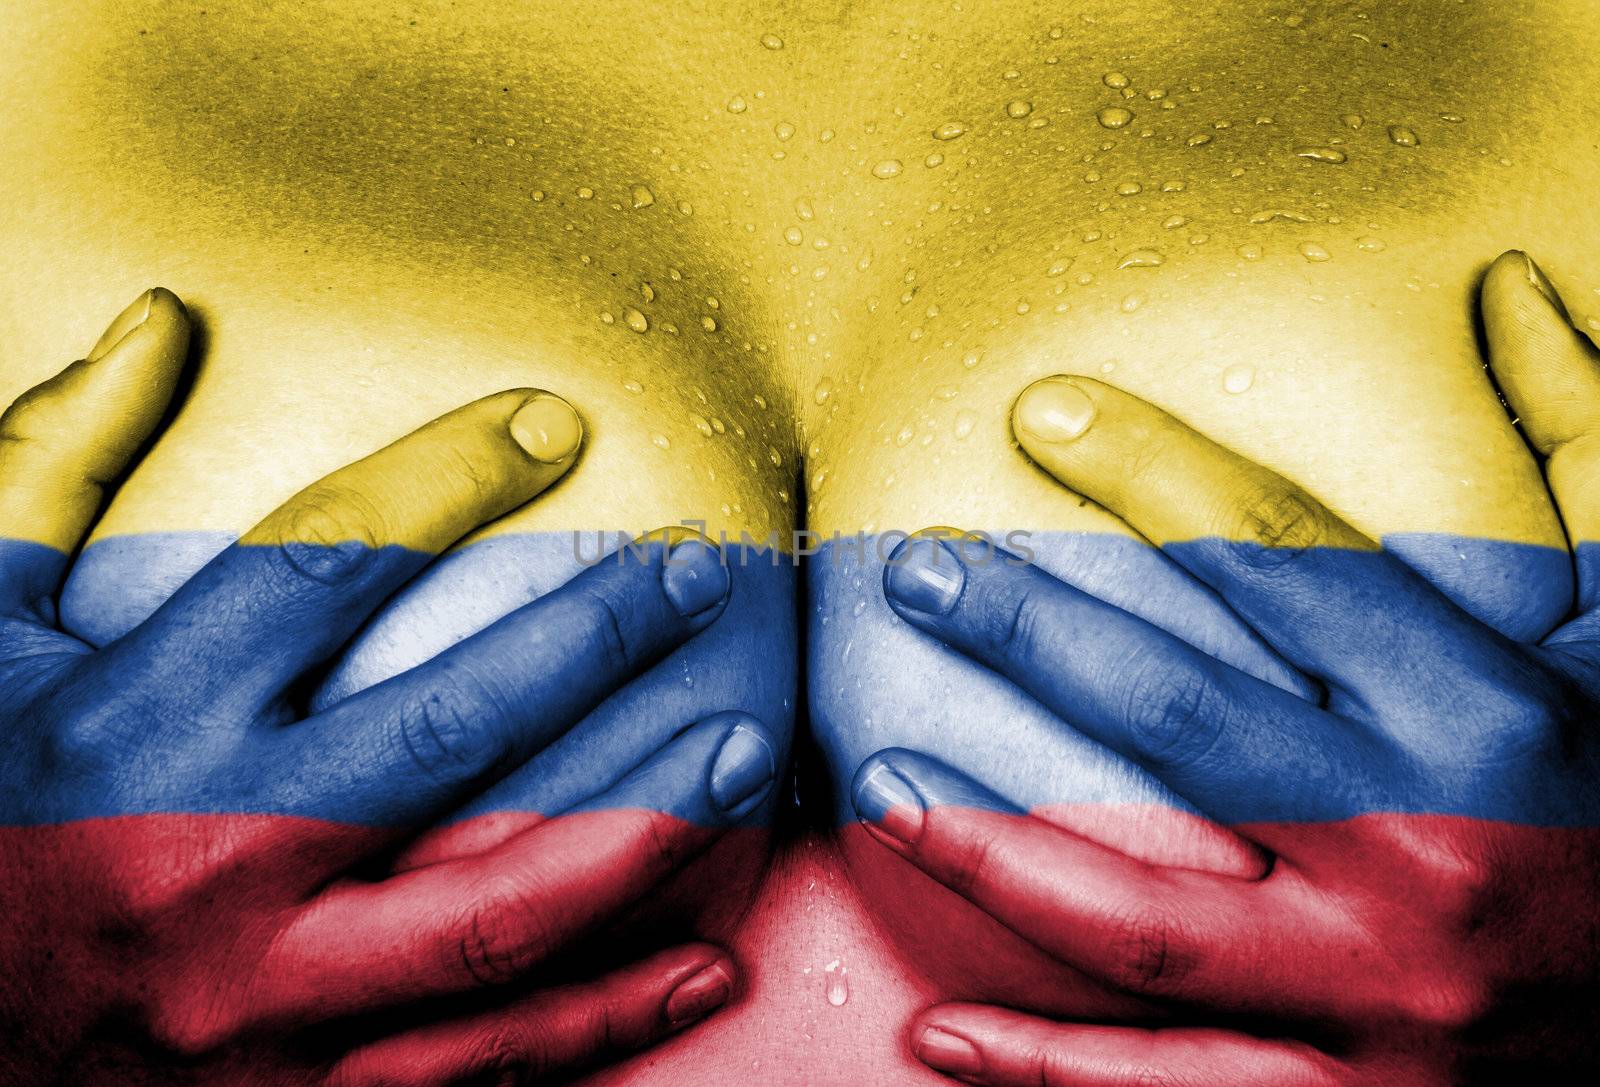 Sweaty upper part of female body, hands covering breasts, flag of Colombia